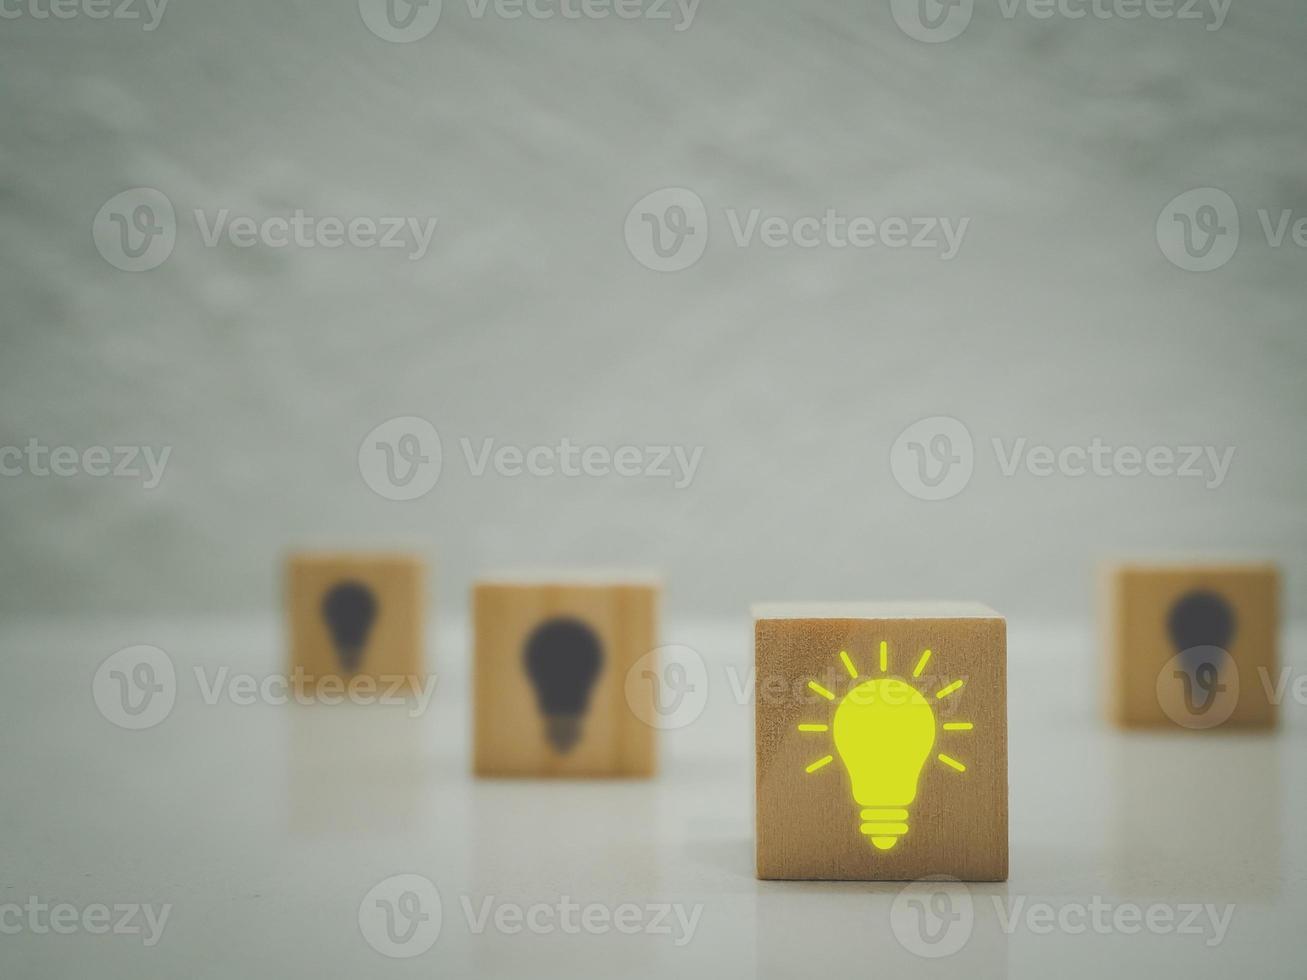 ideas and creativity Wooden cube with light bulb icon on dark background with light bulbs. creating new ideas A different concept photo